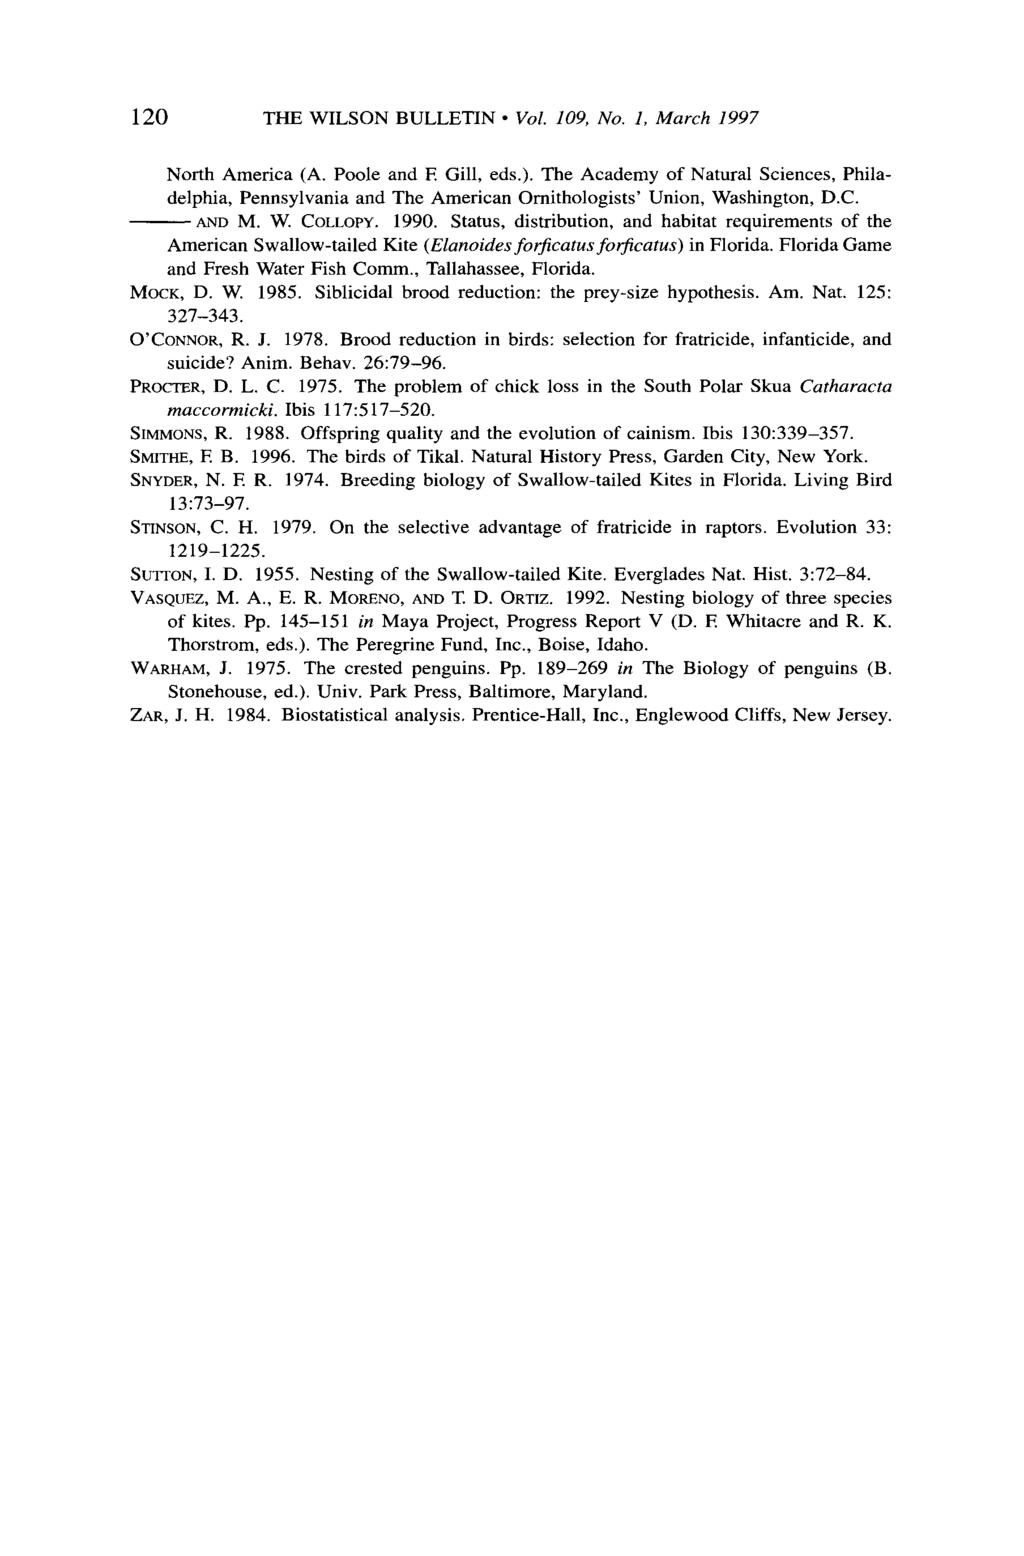 120 THE WILSON BULLETIN * Vol. 109, No. 1, March 1997 North America (A. Poole and E Gill, eds.).